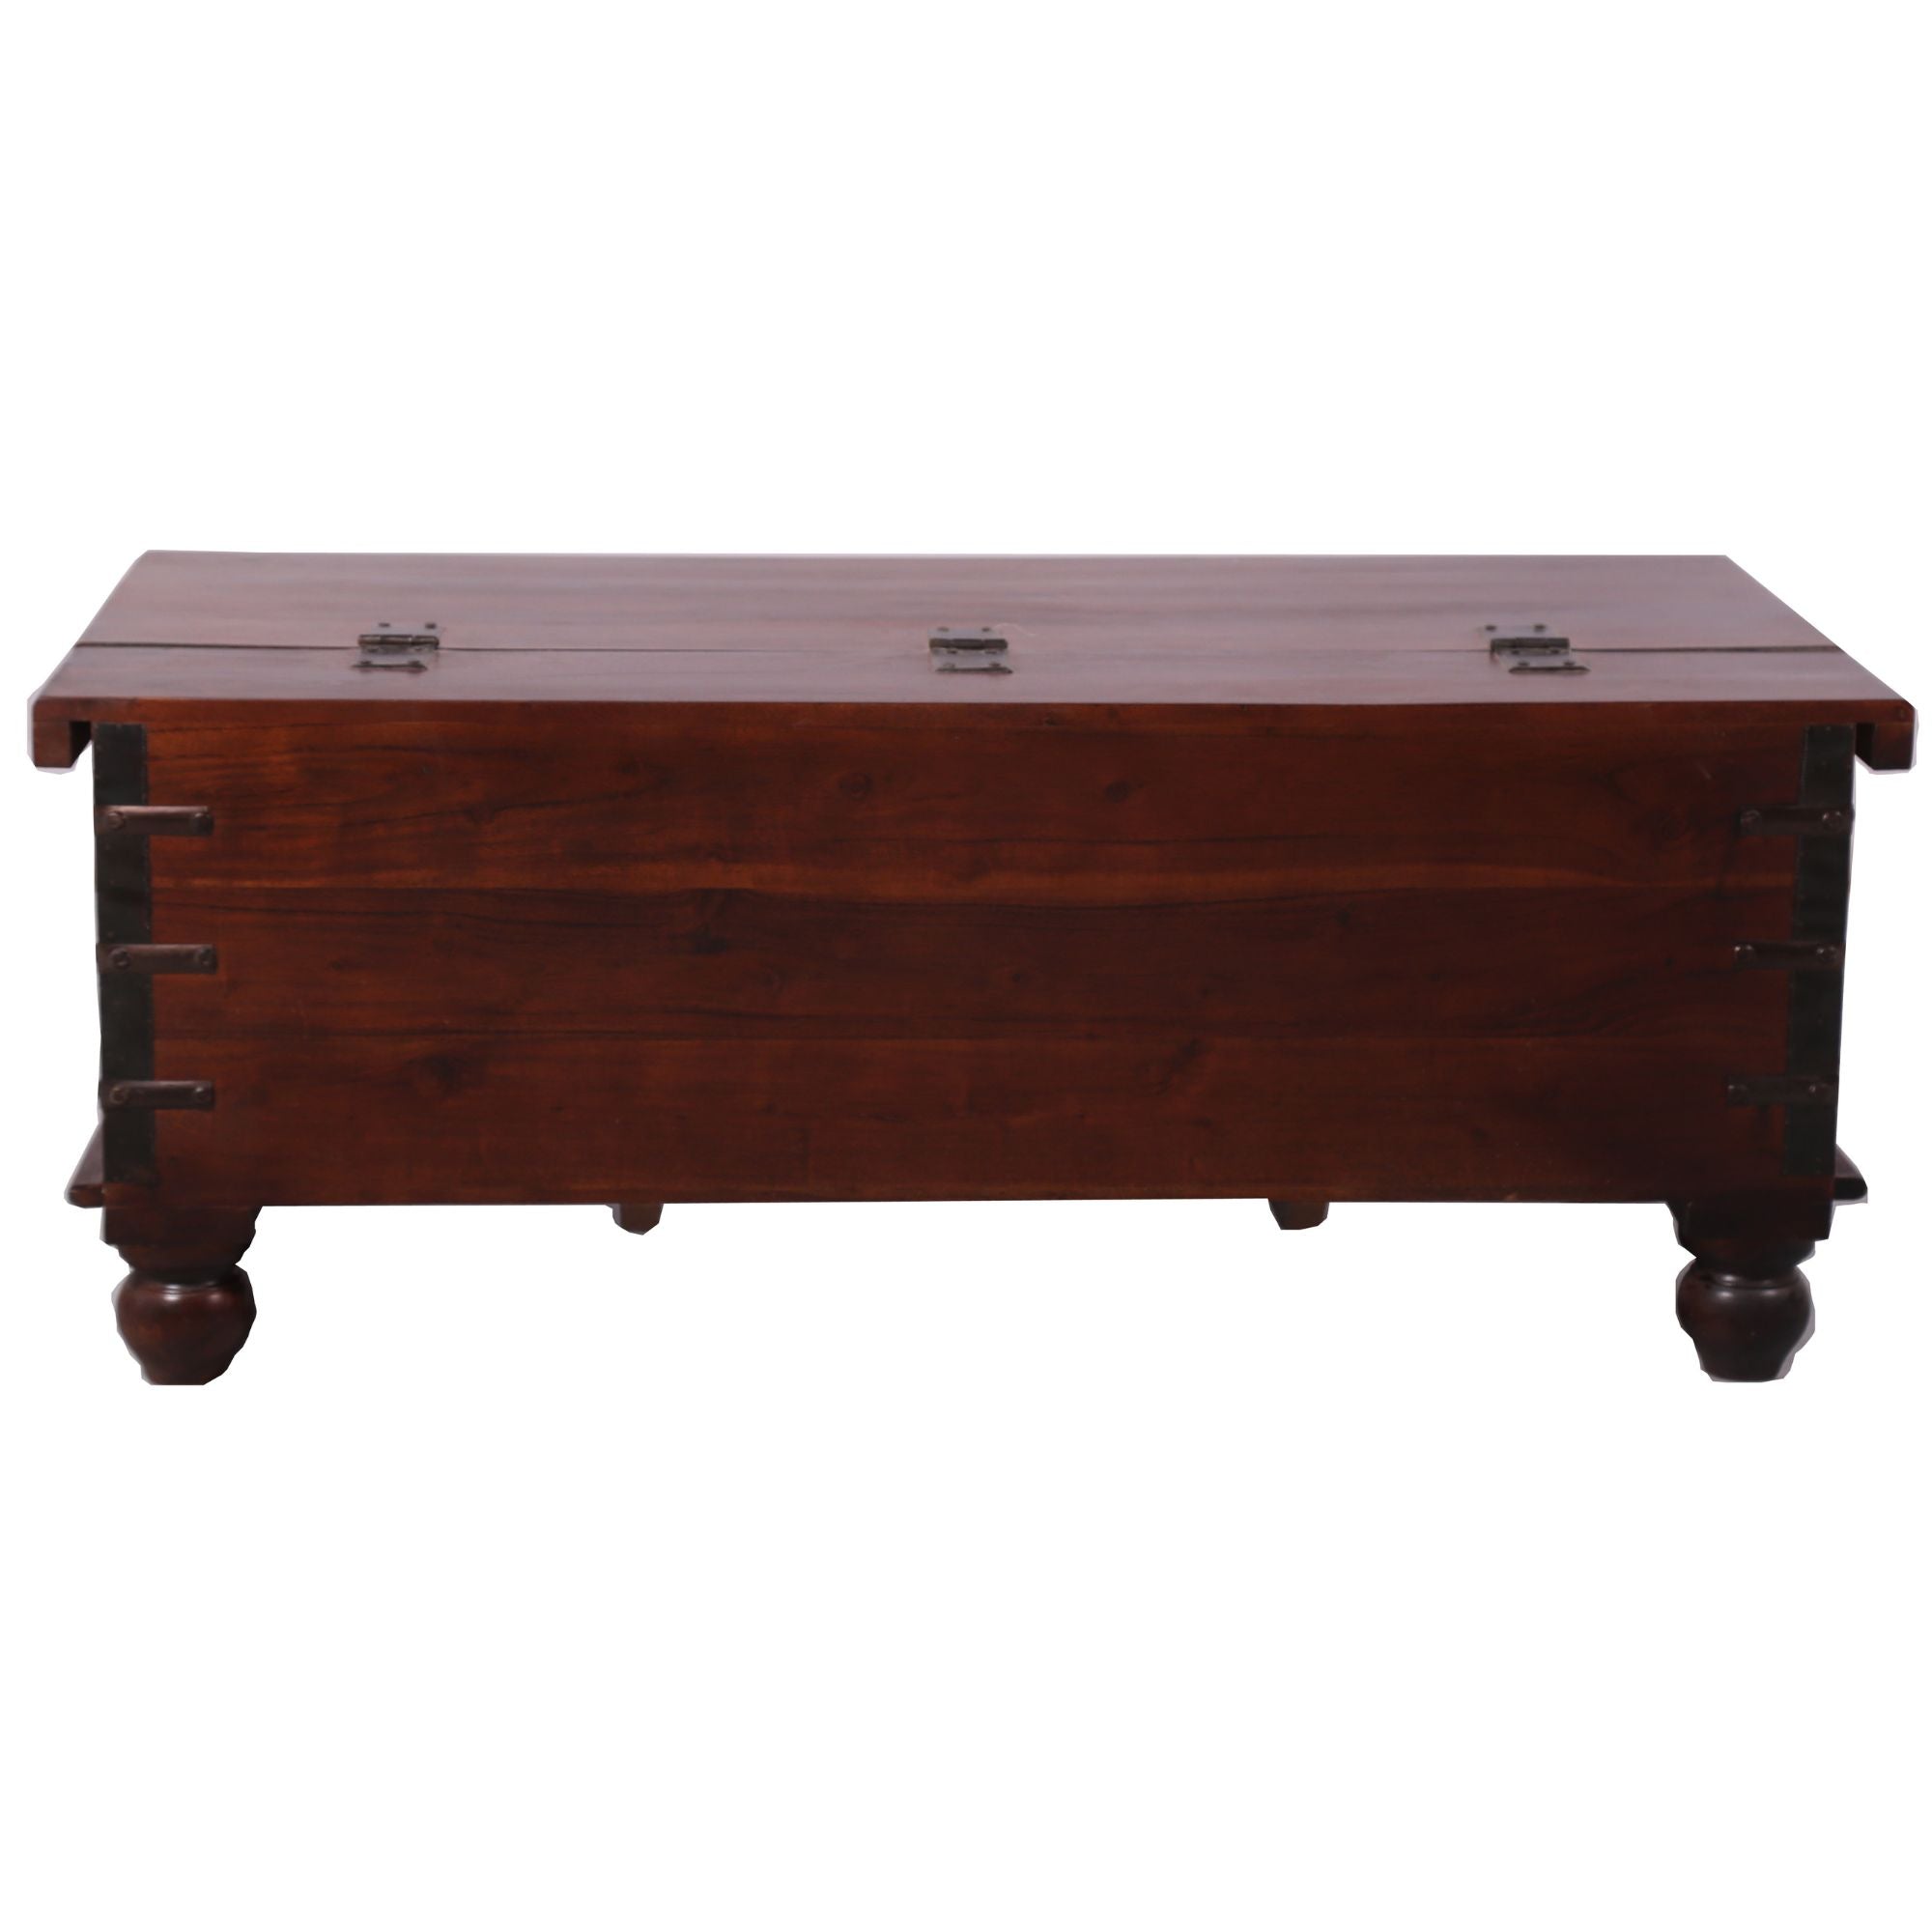 Onir Coffee Table Antique Handcrafted Solid Mango Wood Storage Trunk Chest Box